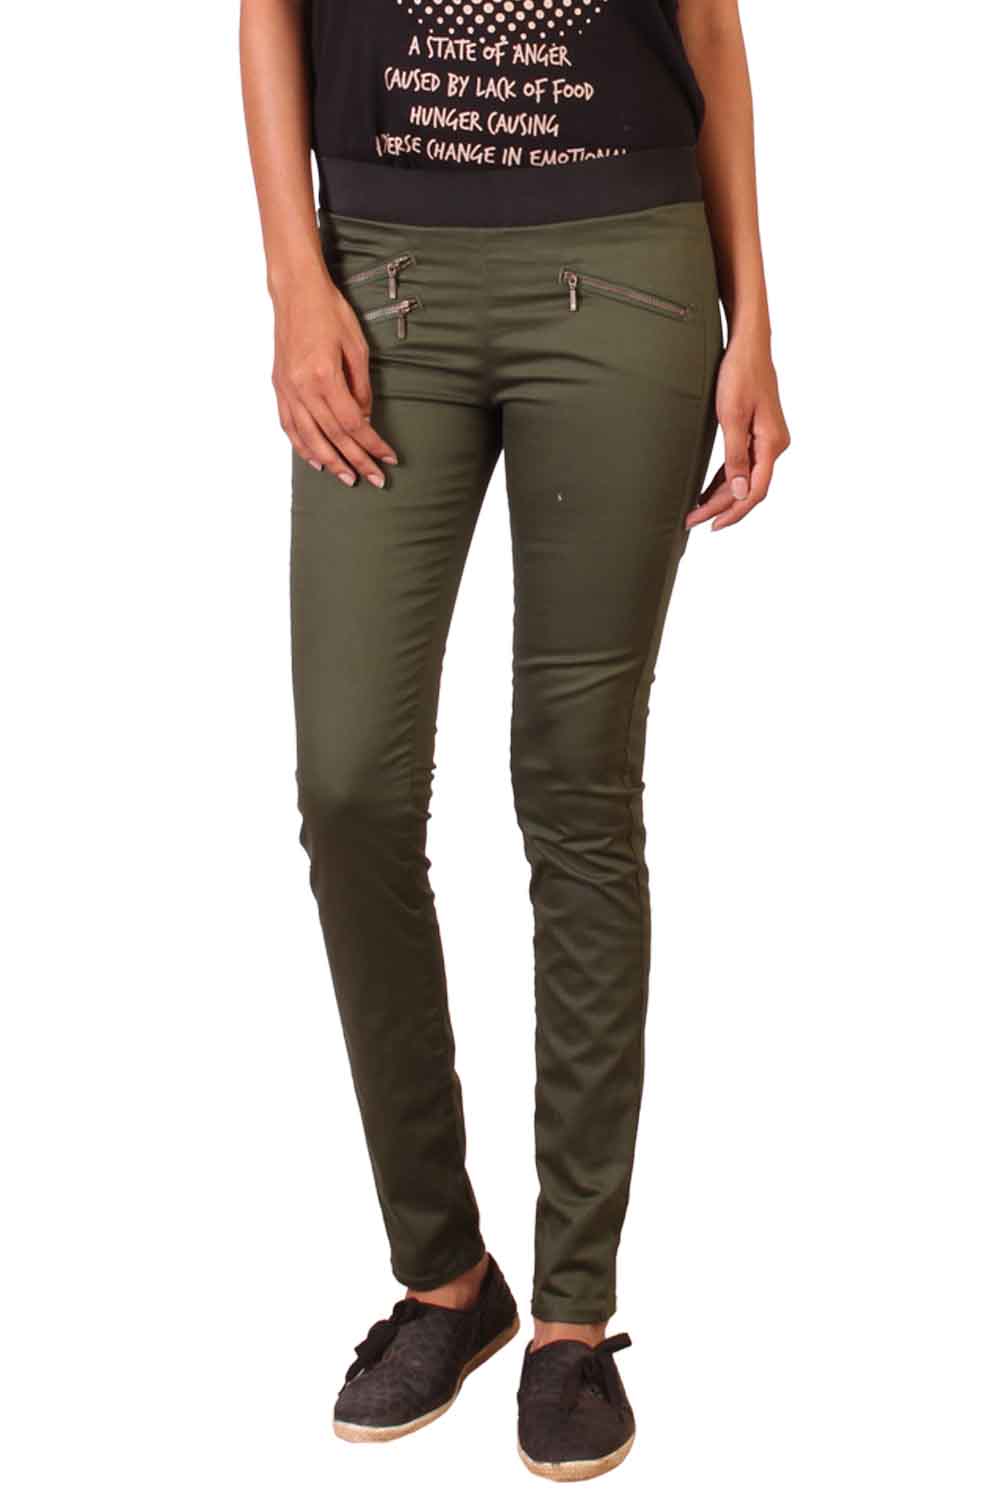 Buy Lee Green Slim Fit Mid Waist Womens Jeans Online @ ₹1000 from ShopClues